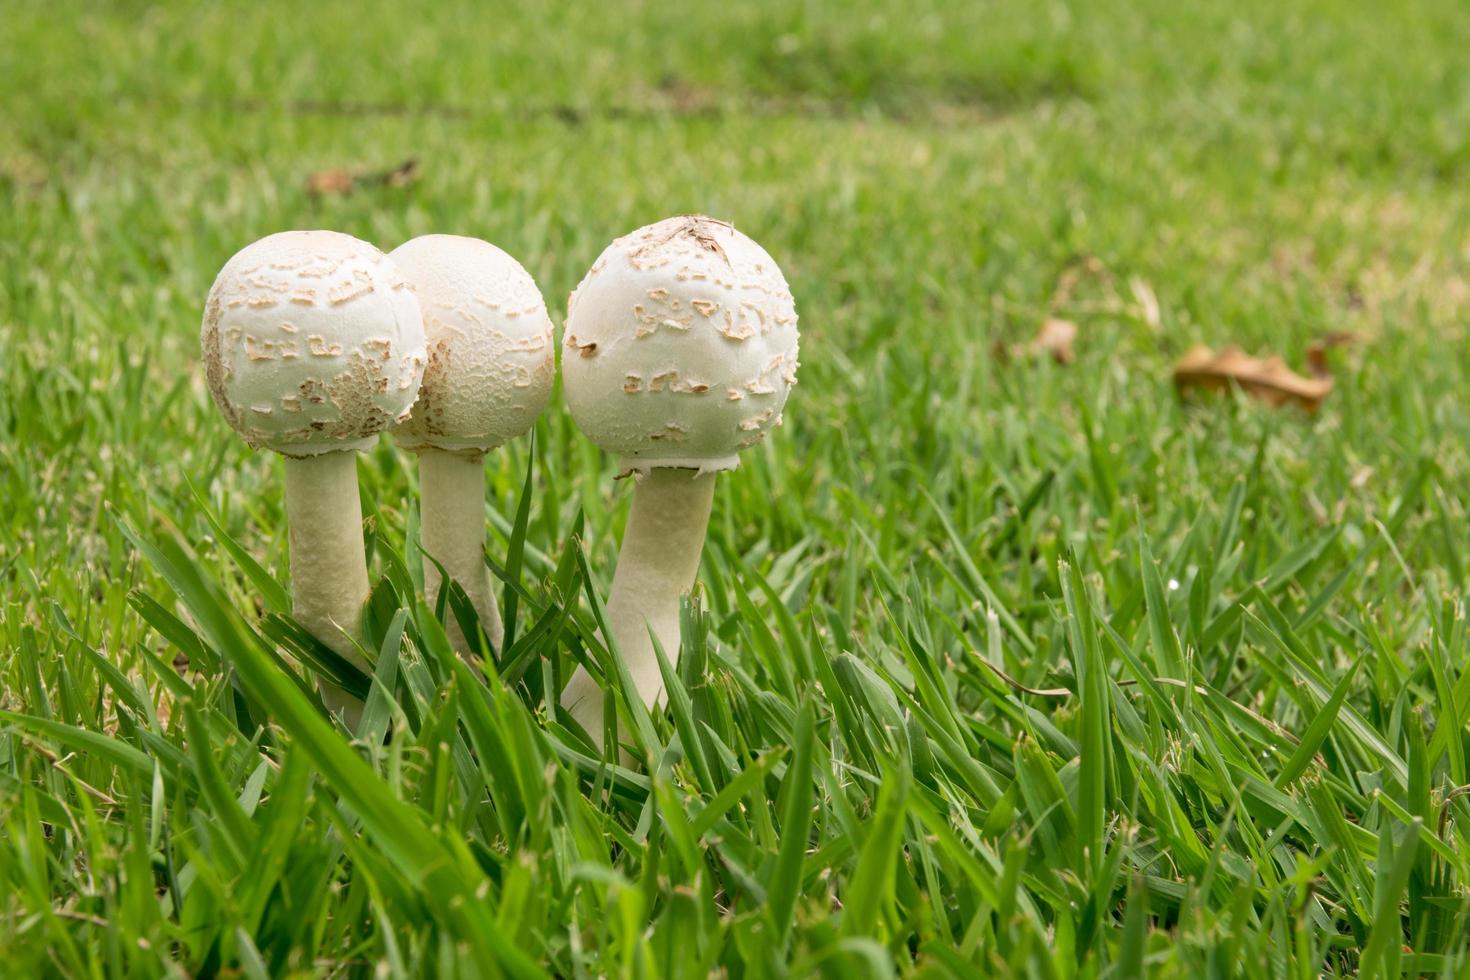 mushroom growing in the grass photo